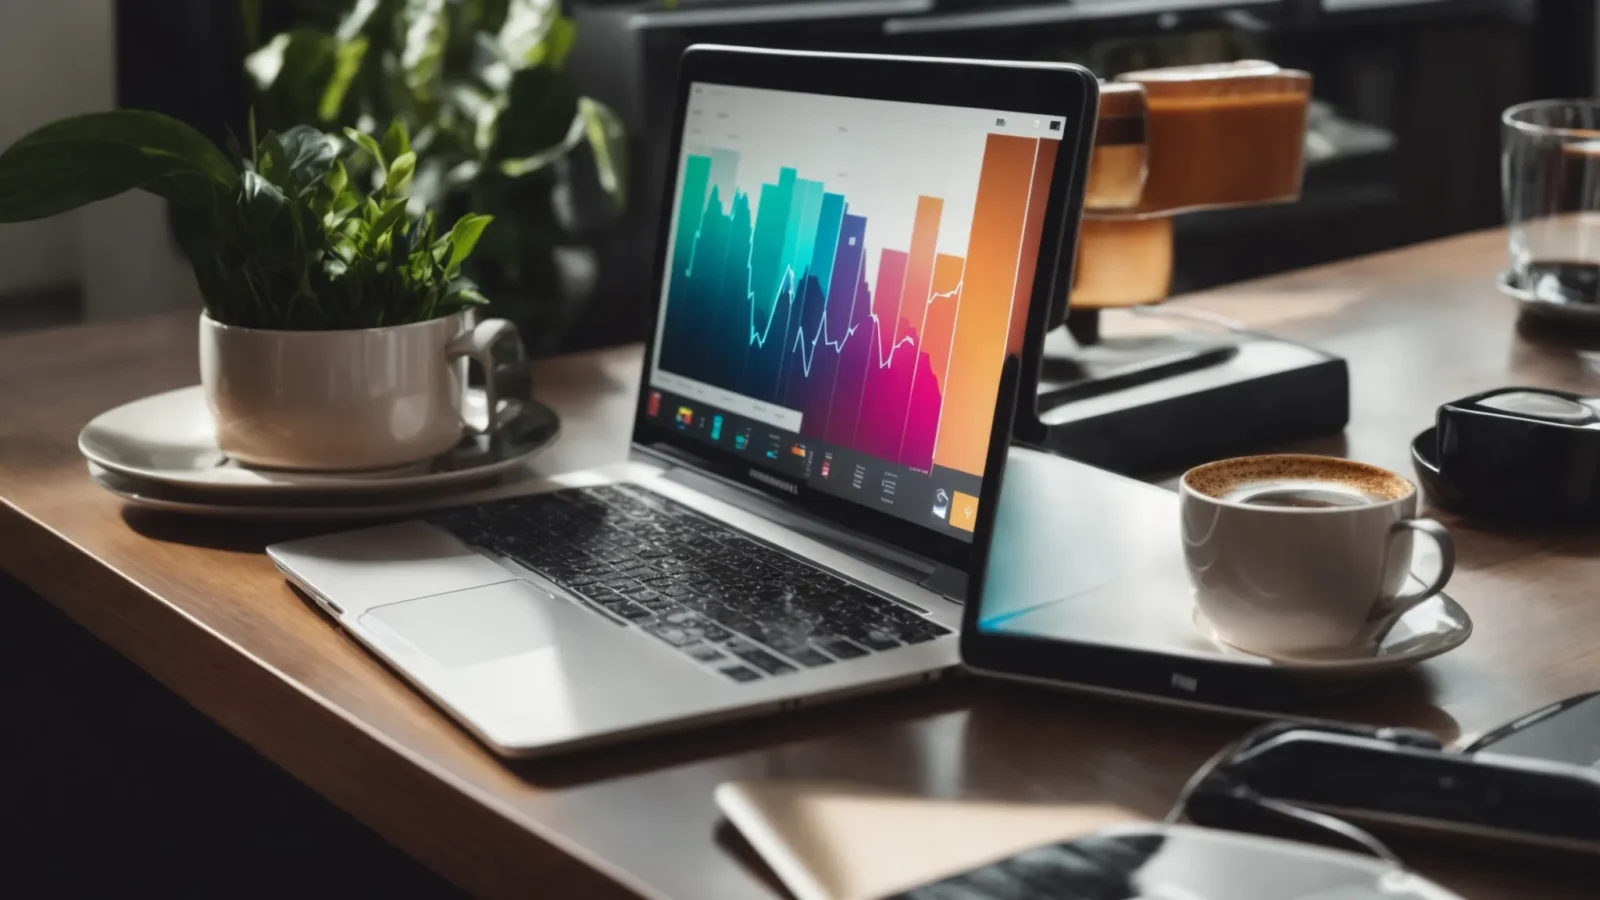 a laptop displaying colorful graphs and shopping icons sits on a sleek, modern desk with a cup of coffee beside it, symbolizing ecommerce marketing strategies in action.